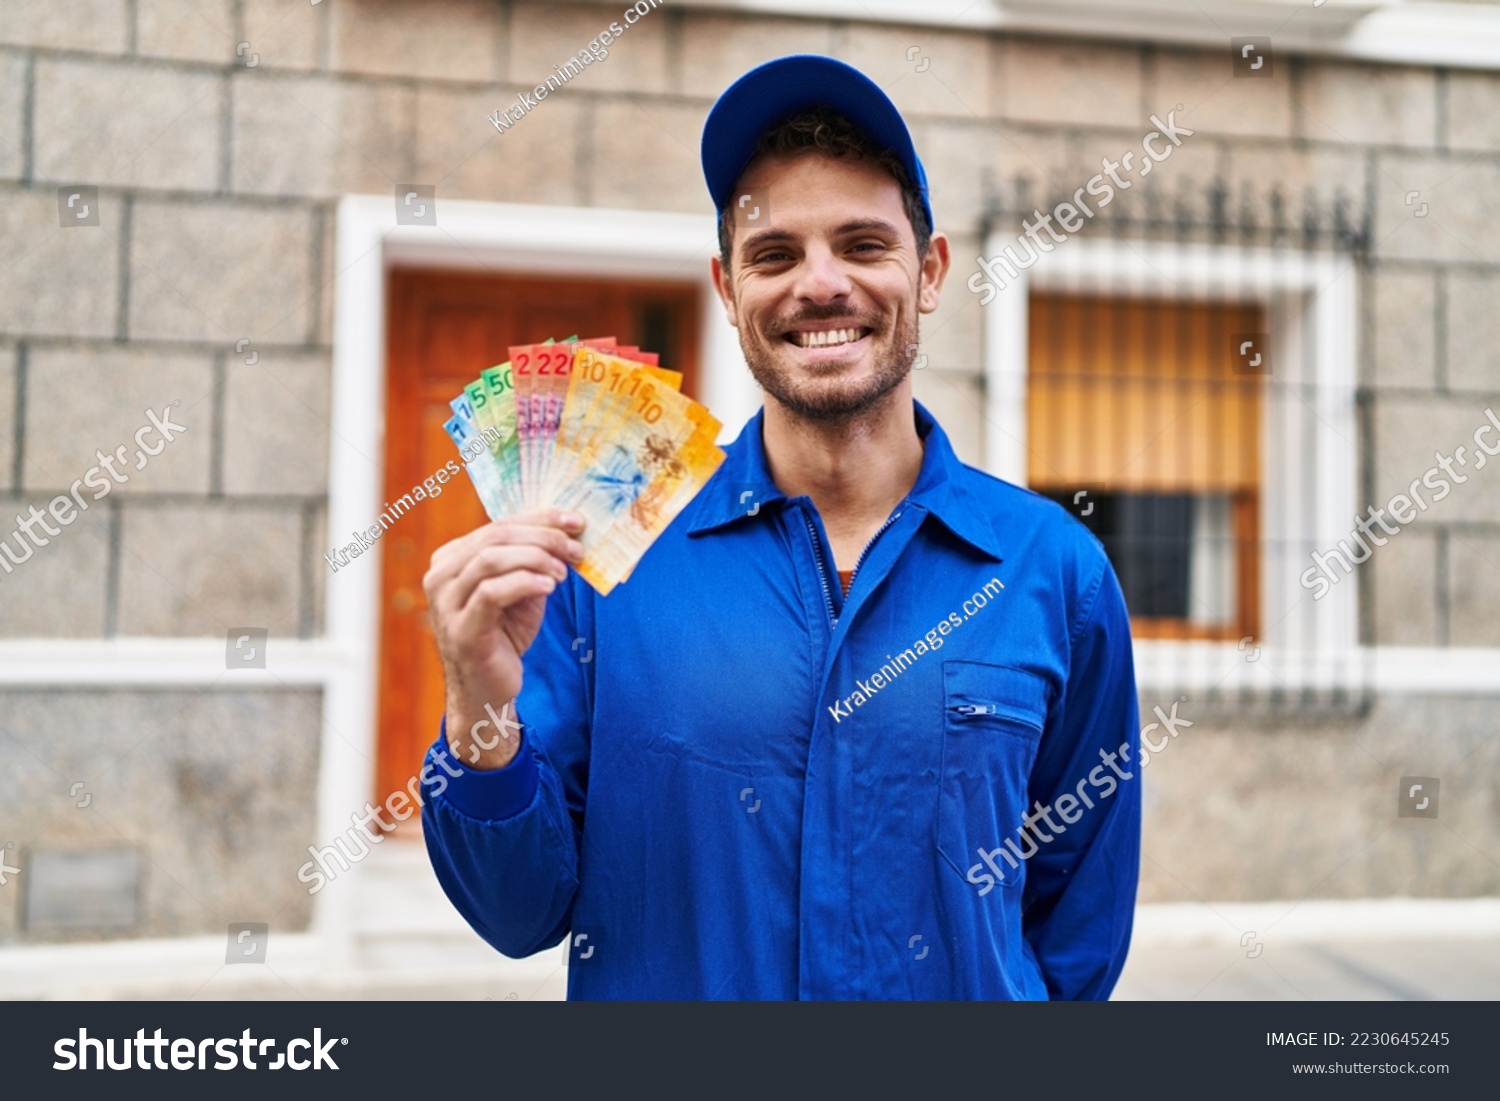 Young hispanic man wearing handyman uniform holding swiss francs looking positive and happy standing and smiling with a confident smile showing teeth  #2230645245